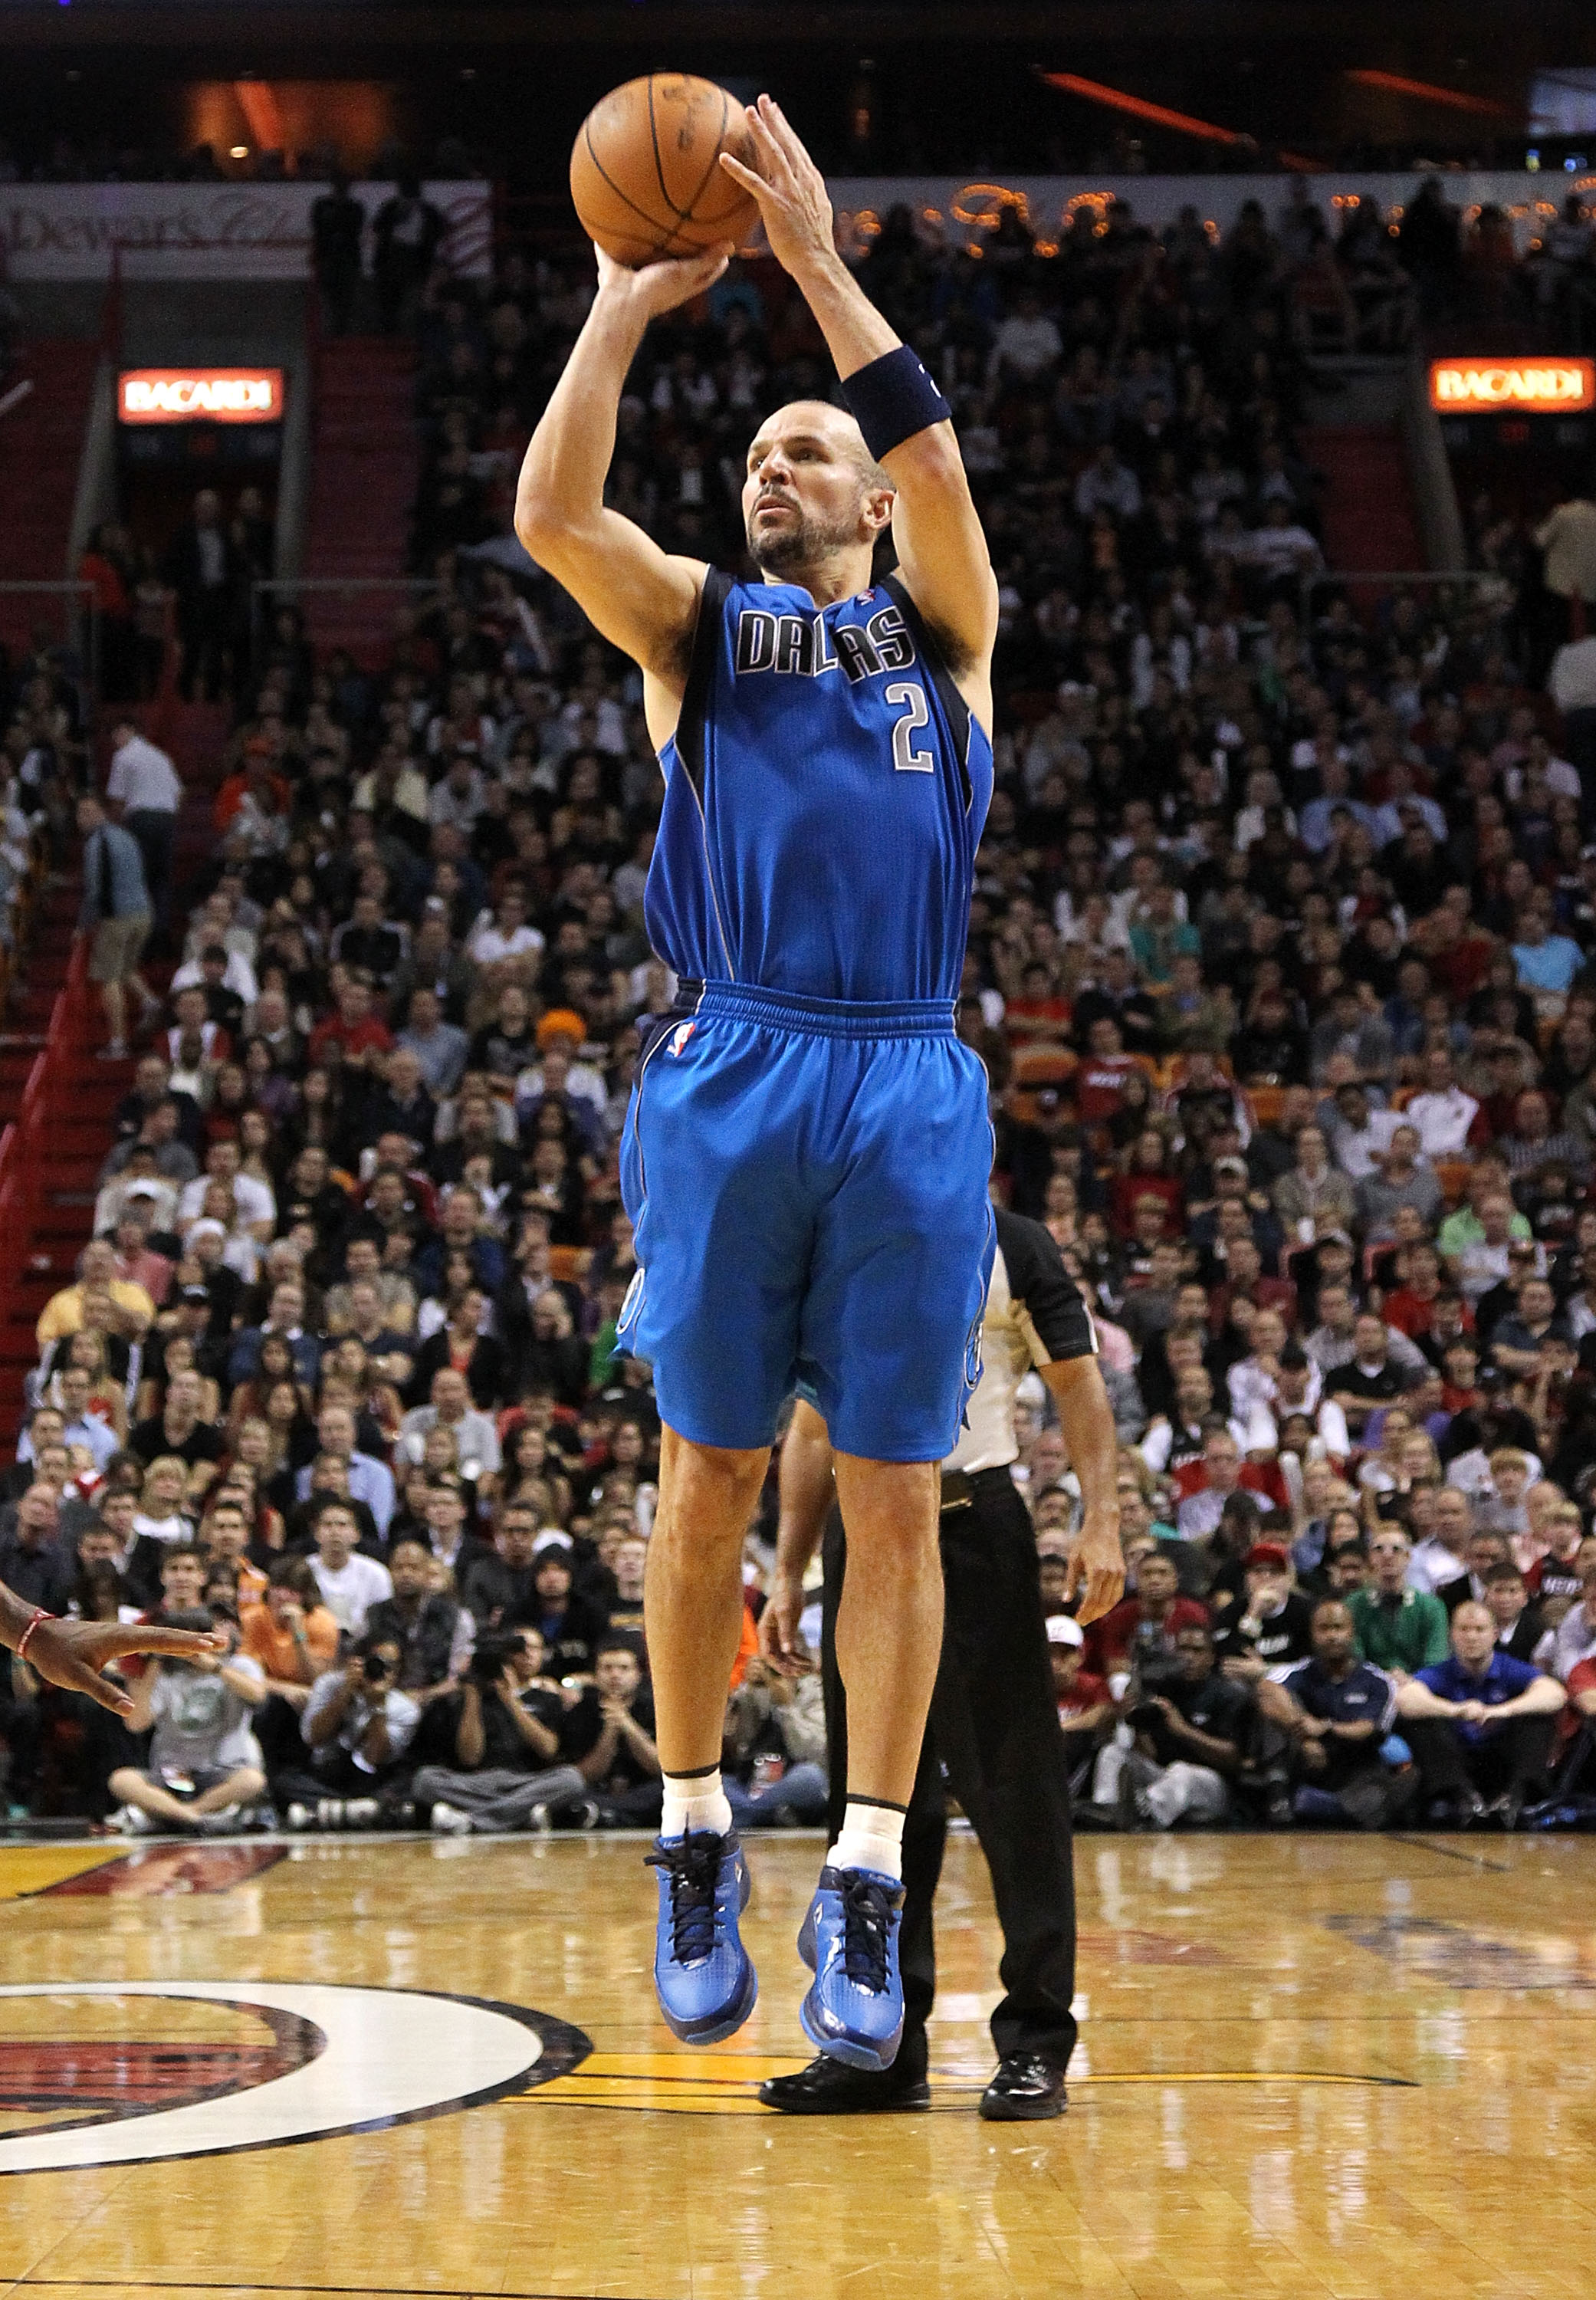 MIAMI, FL - DECEMBER 20:  Jason Kidd #2 of the Dallas Mavericks shoots the ball during a game against the Miami Heat at American Airlines Arena on December 20, 2010 in Miami, Florida. NOTE TO USER: User expressly acknowledges and agrees that, by downloadi